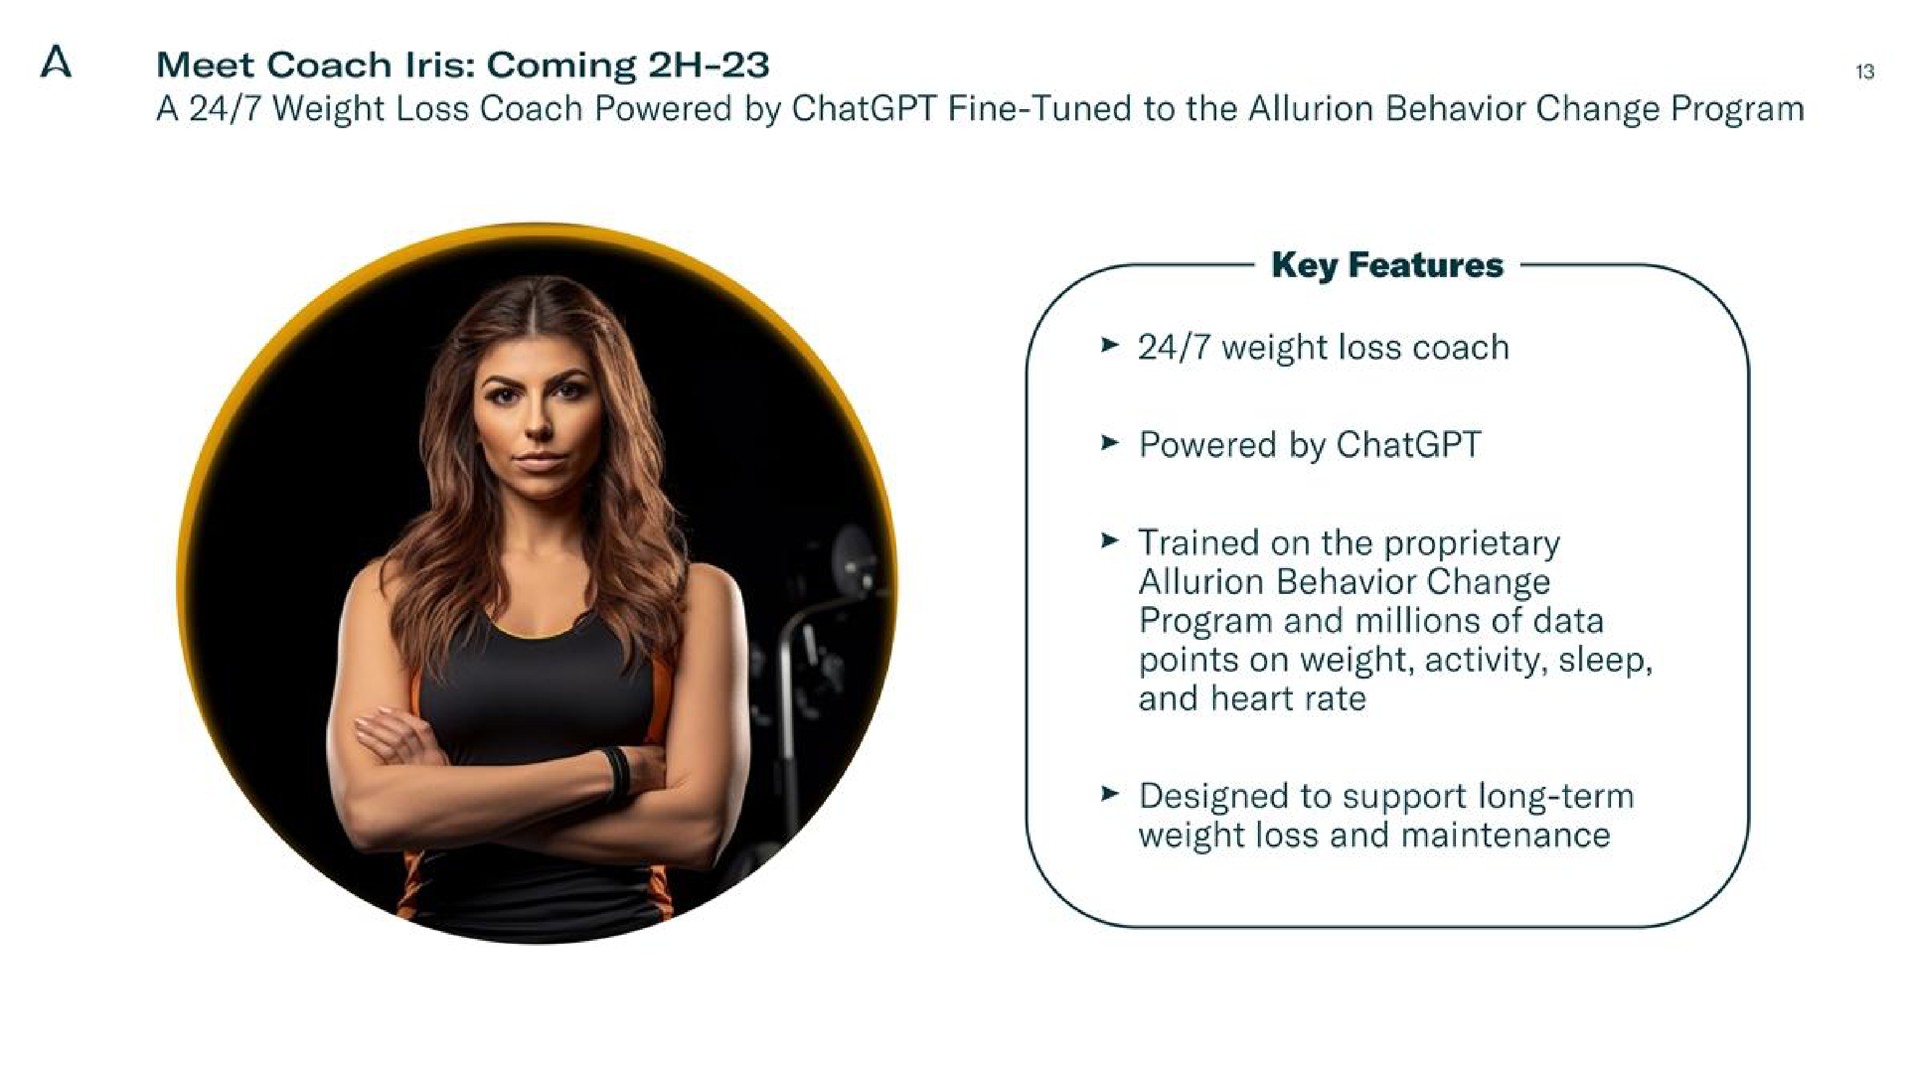 a meet coach iris coming a weight loss coach powered by fine tuned to the behavior change program weight loss coach behavior change program and millions of data | Allurion